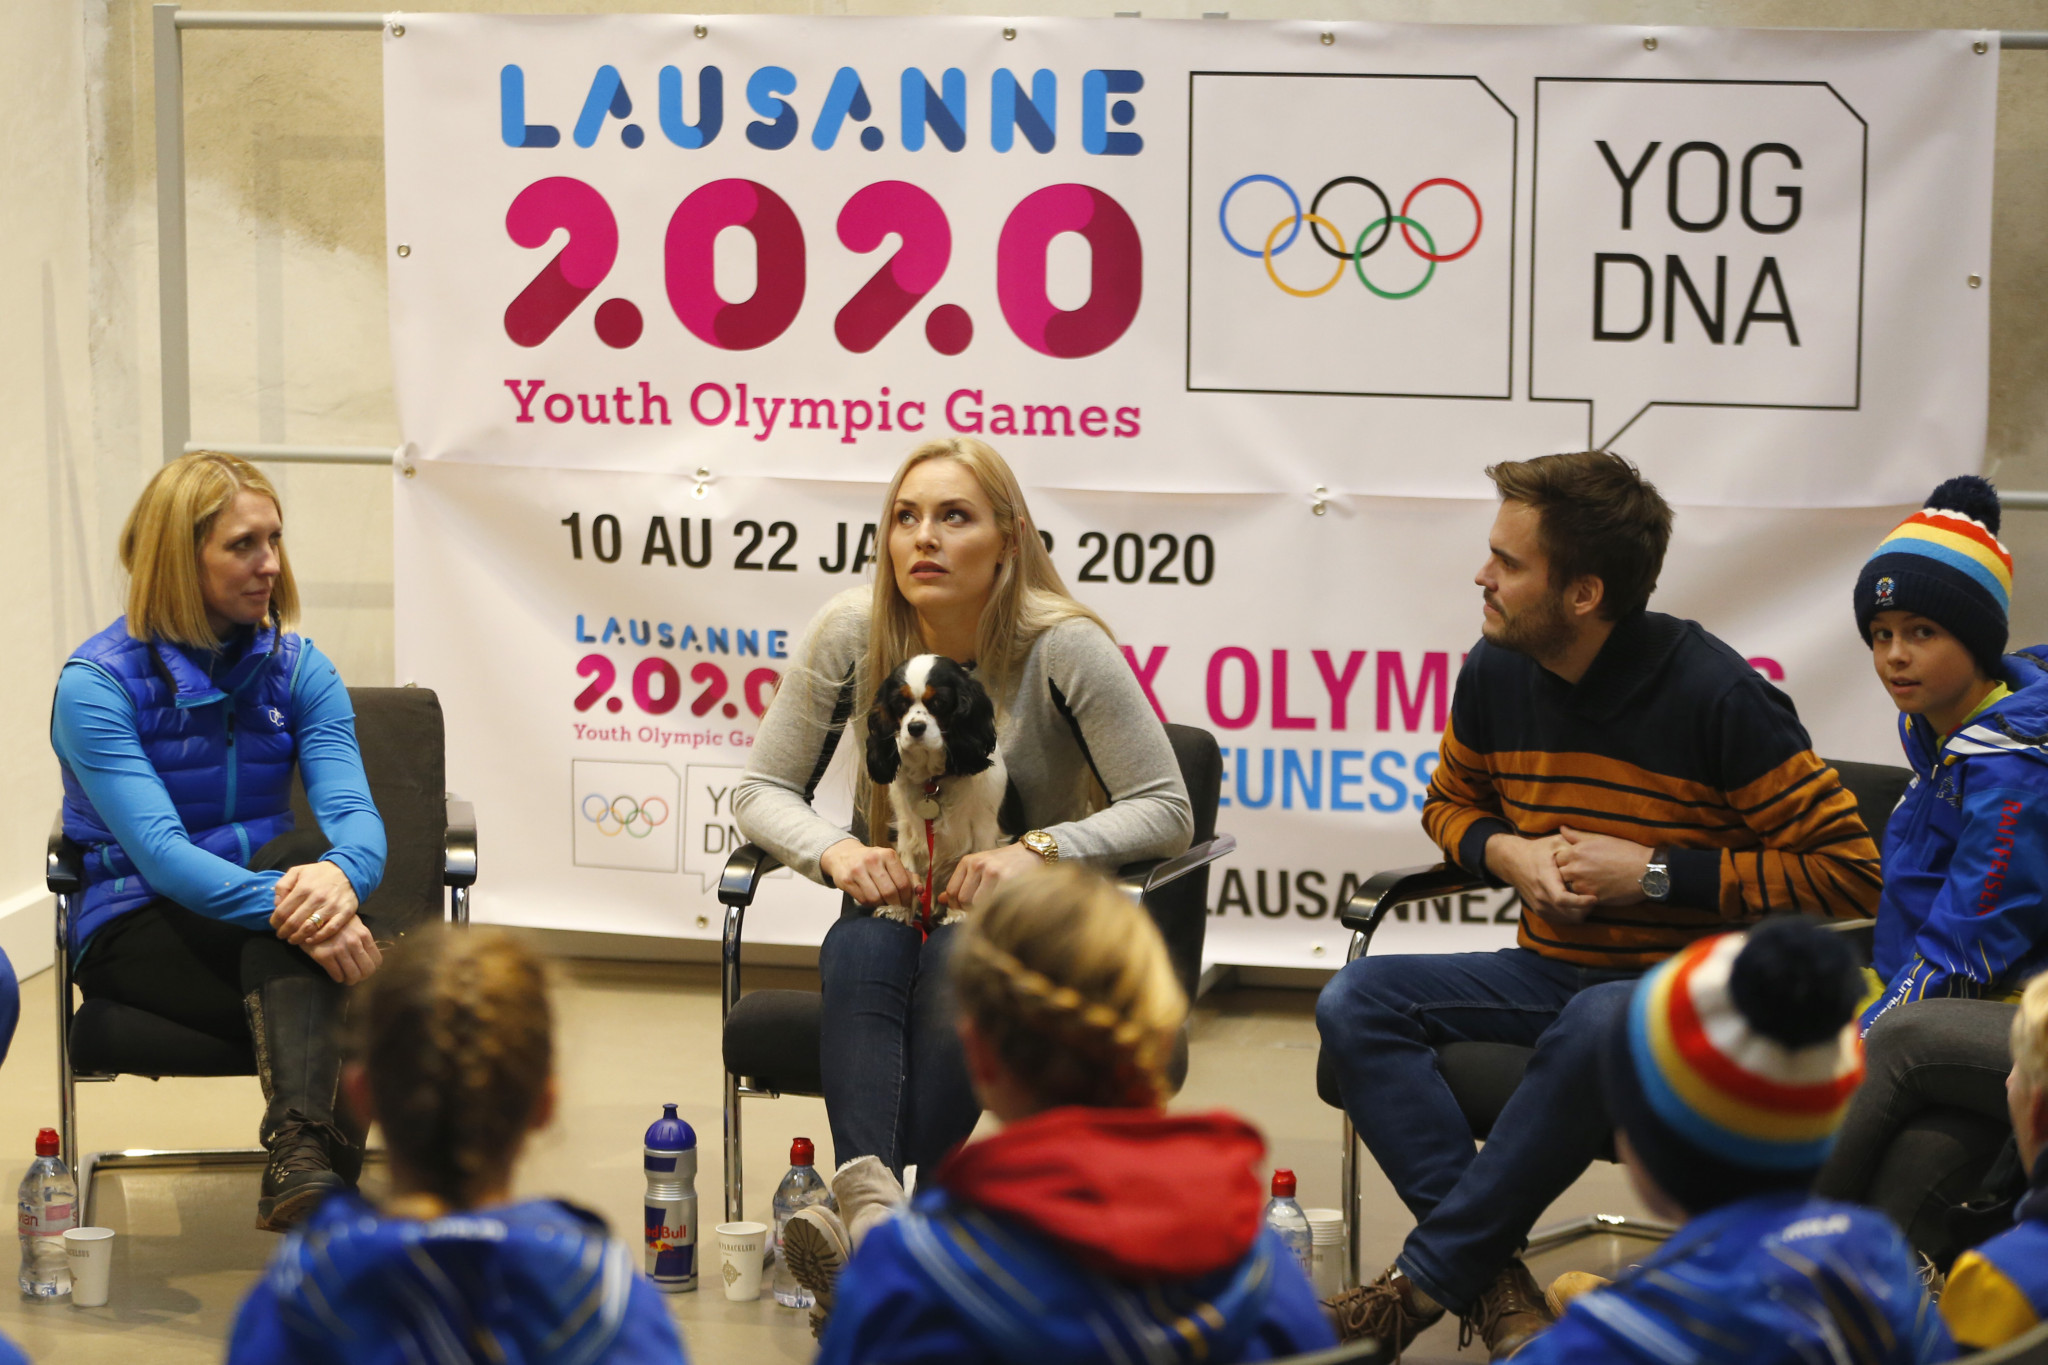 IOC considering rotating Youth Olympics between continents as part of targeted hosting approach